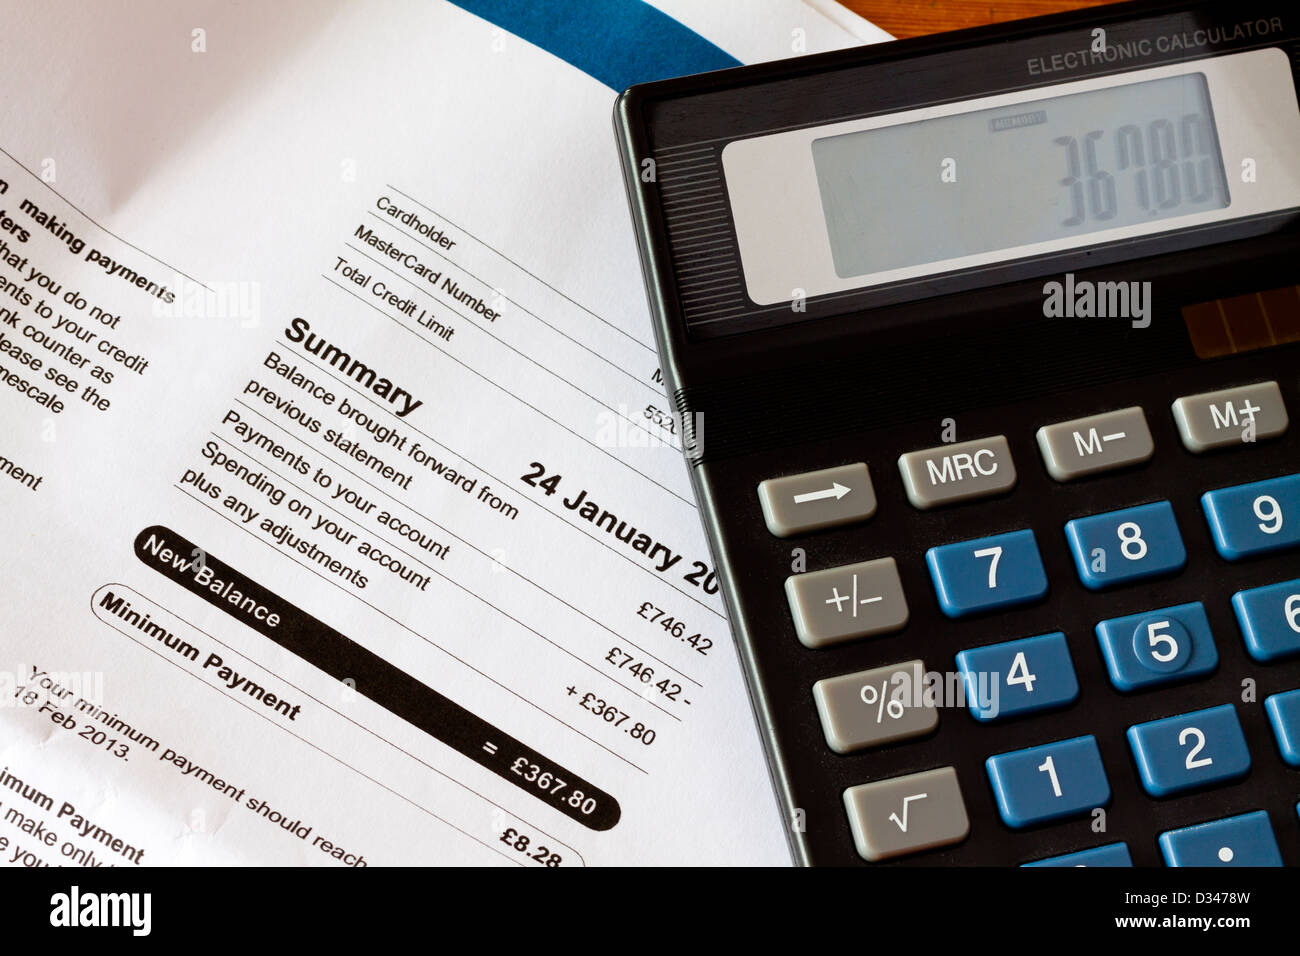 UK credit card bill with electronic calculator Stock Photo